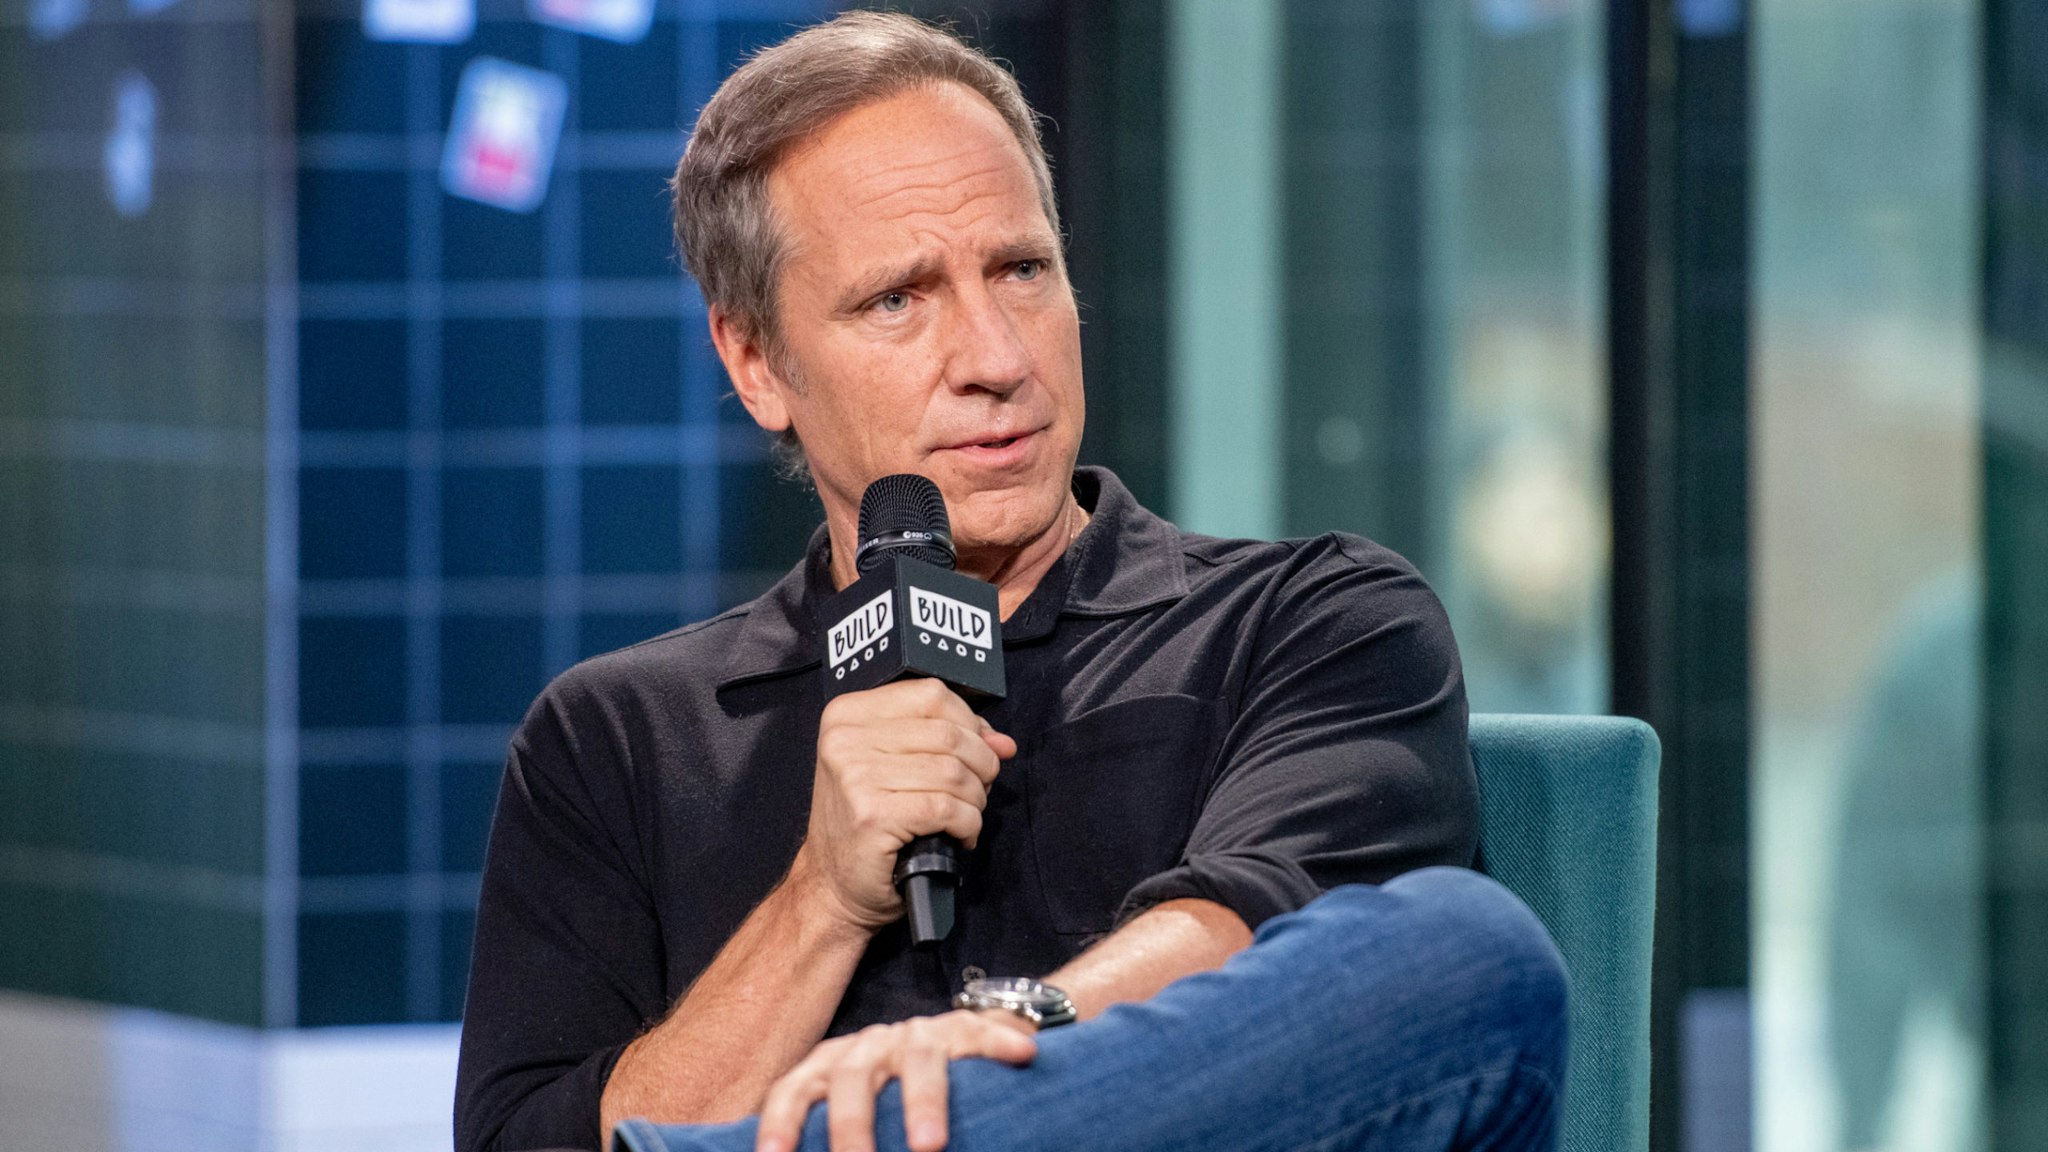 Mike Rowe discusses "Returning the Favor" with the Build Series at Build Studio on February 05, 2019 in New York City.